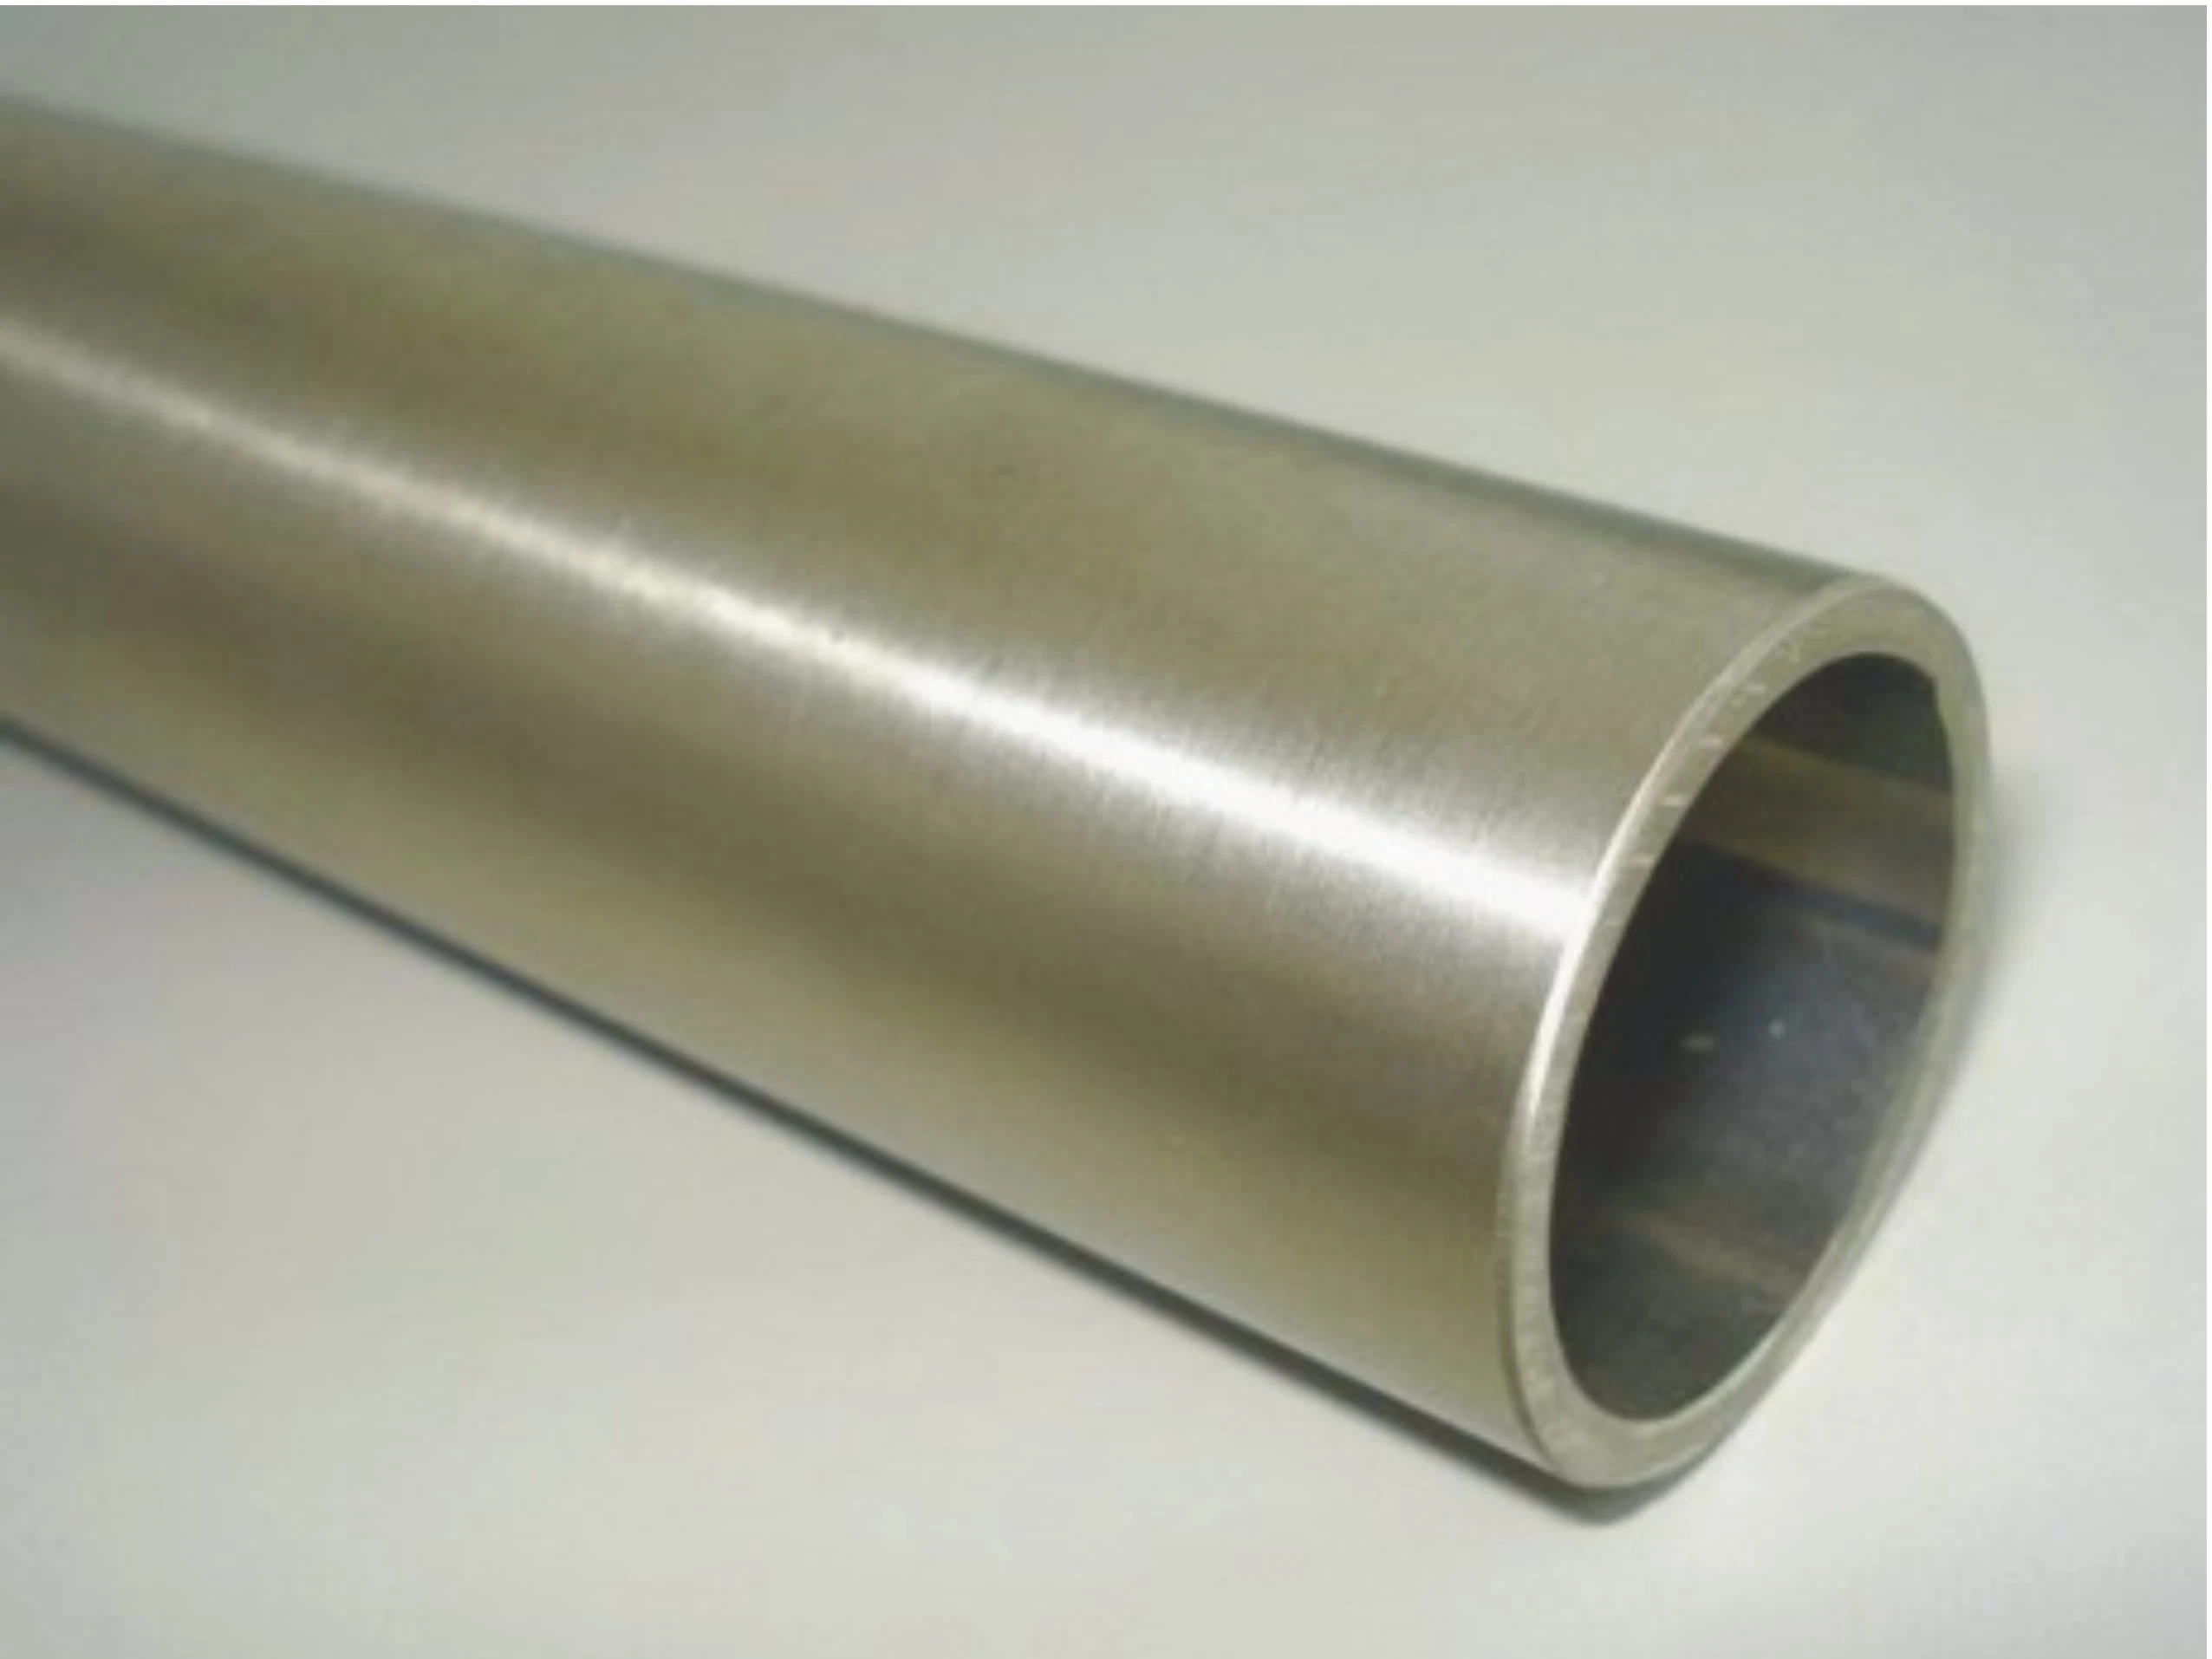 Manufacturer Stainless Steel Seamless Duplex Pipe (S31803/094L)